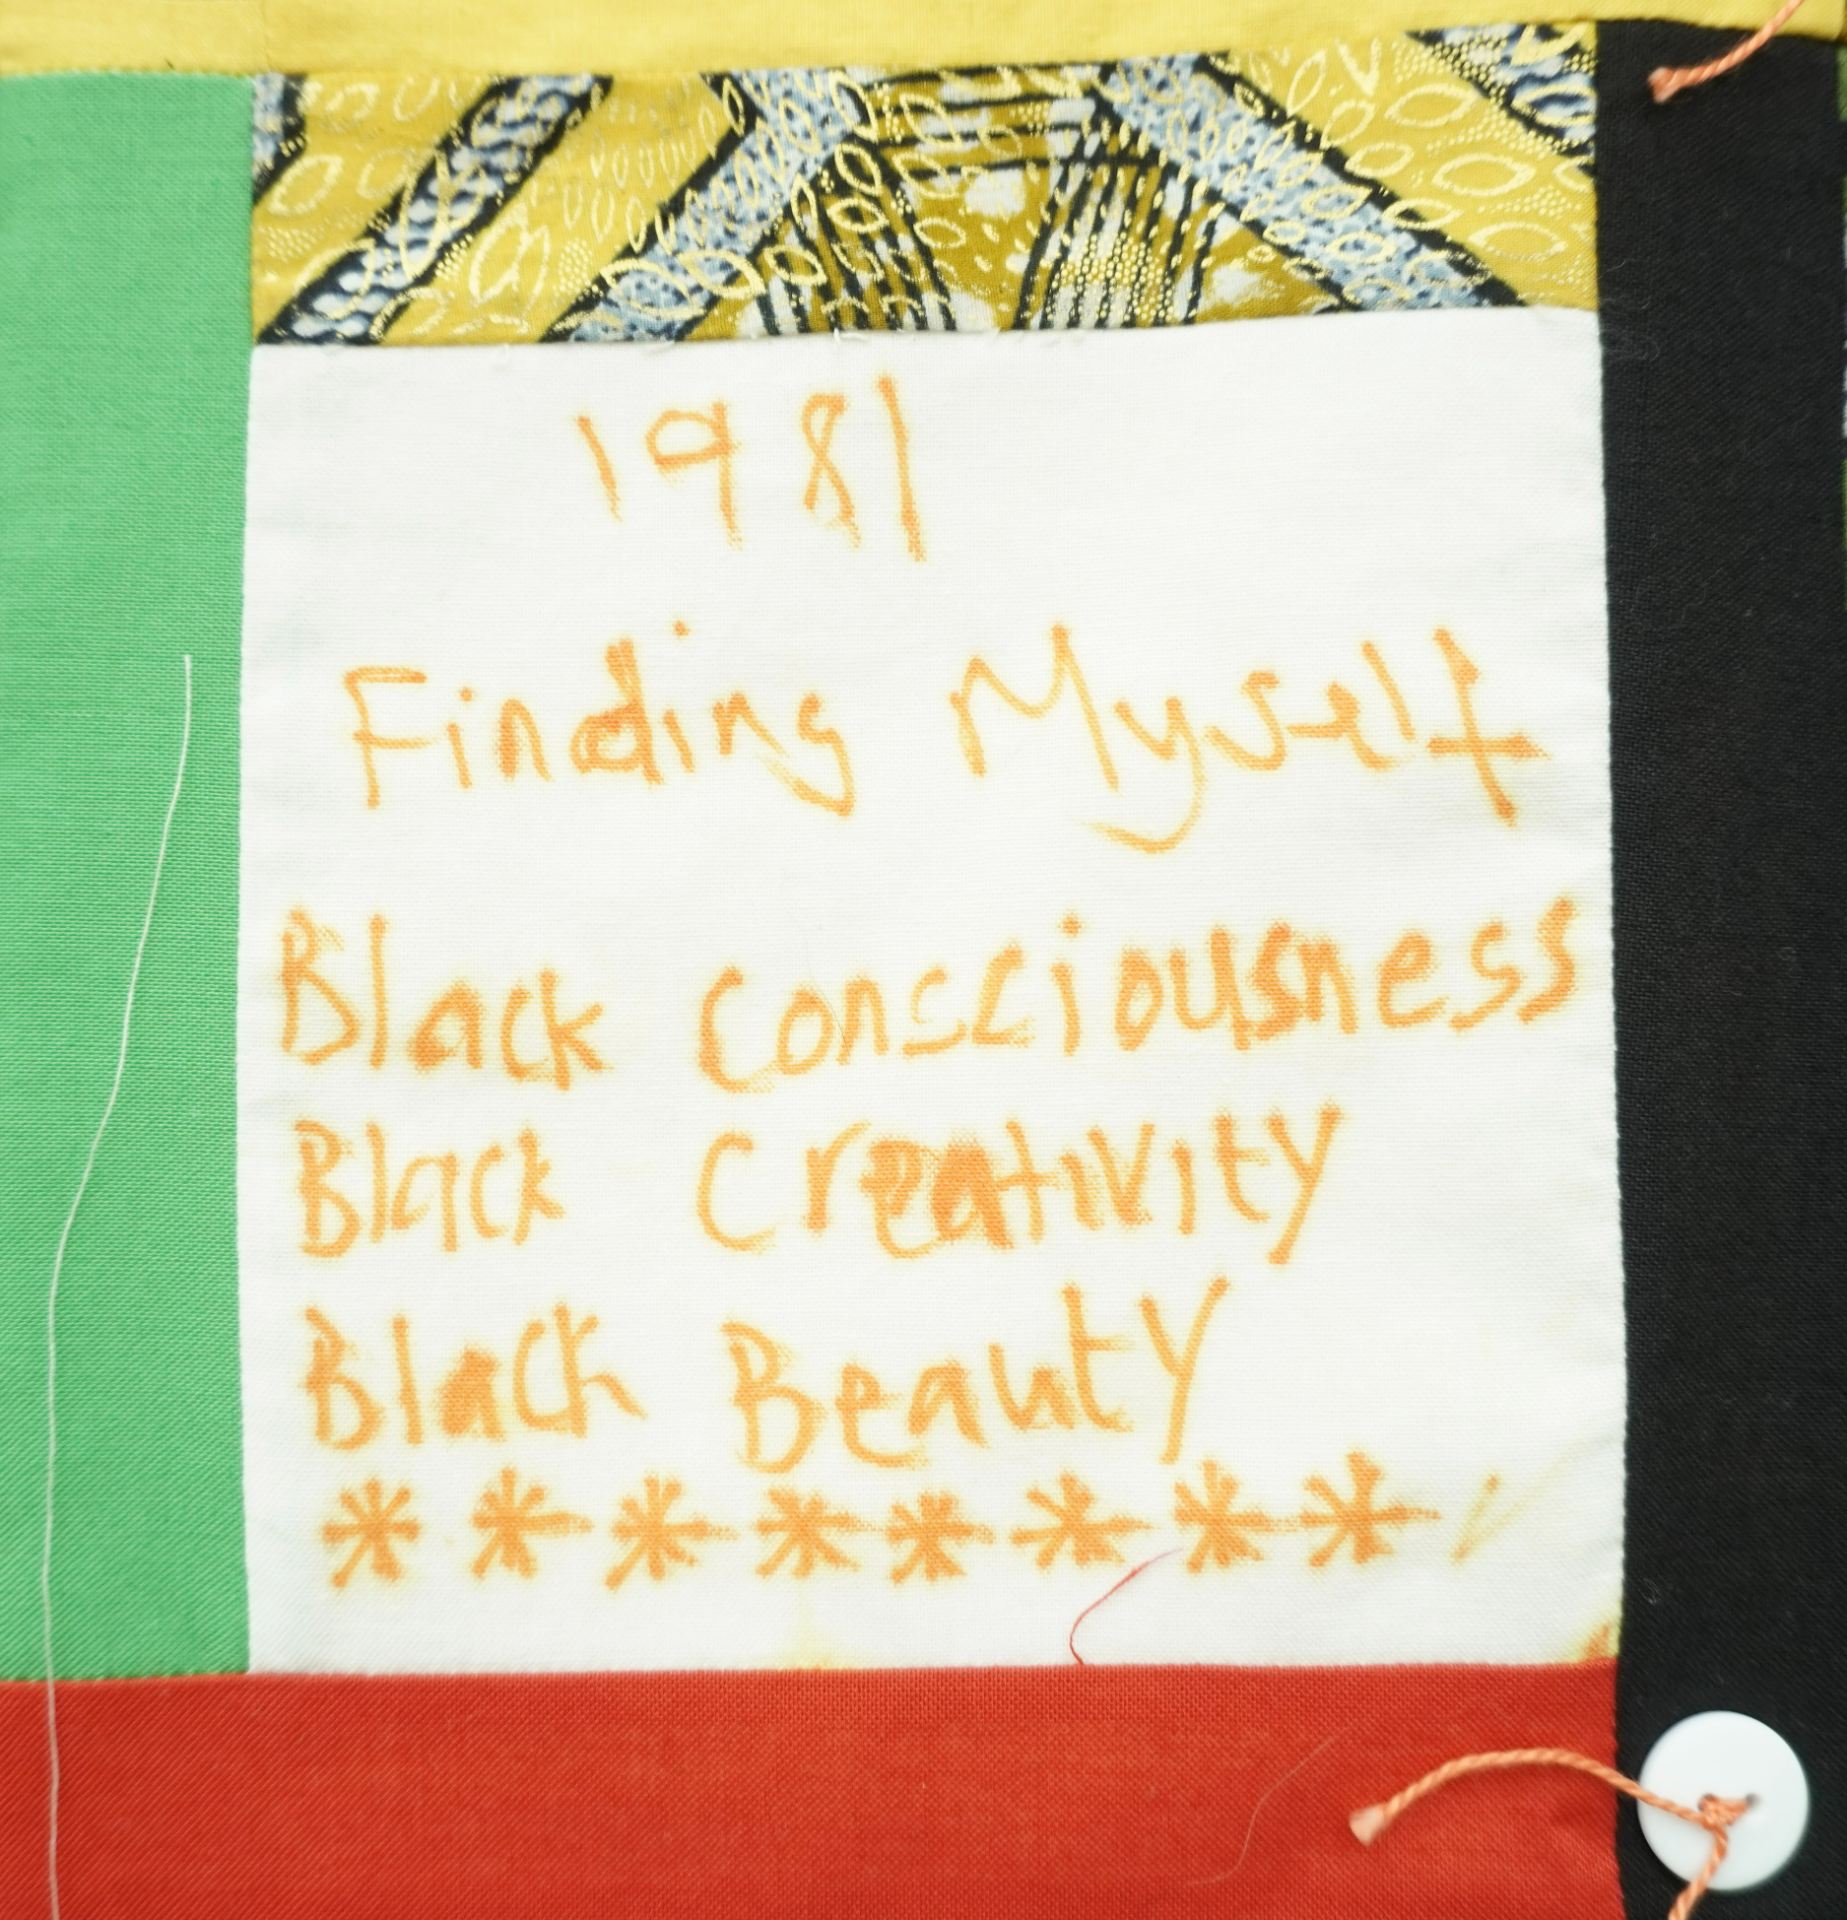 Commemorative quilt. Text reads, '1981 Finding myself. black consciousness, black creativity, black beauty'